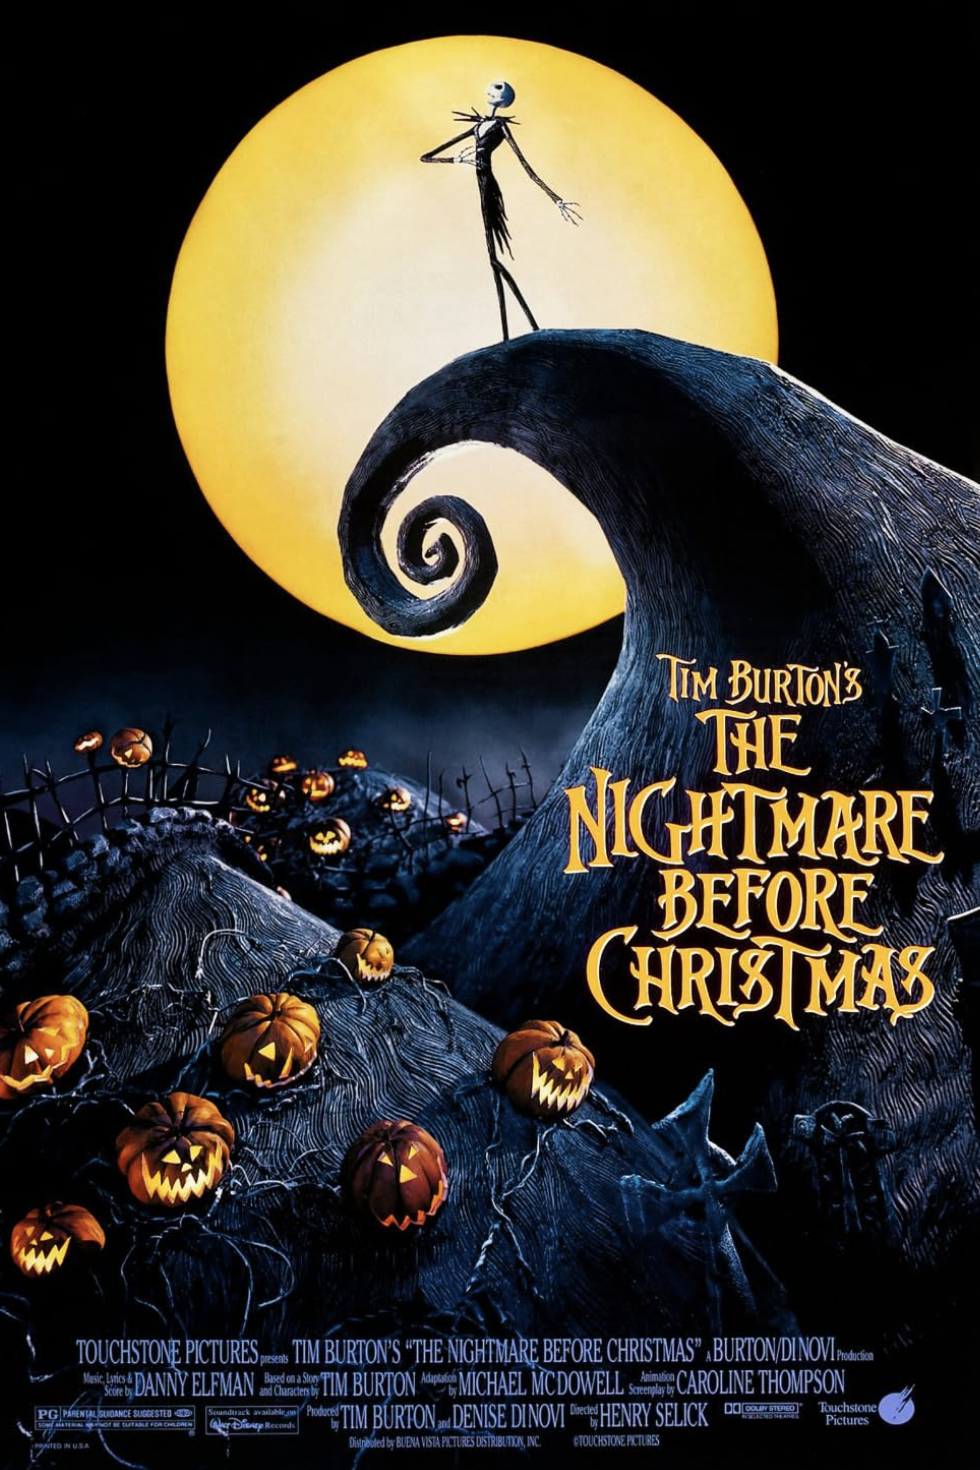 https://hips.hearstapps.com/hmg-prod/images/christmas-movies-on-amazon-tim-burton-s-the-nightmare-before-christmas-653fe0a15f605.png?crop=0.9879032258064516xw:1xh;center,top&resize=980:*